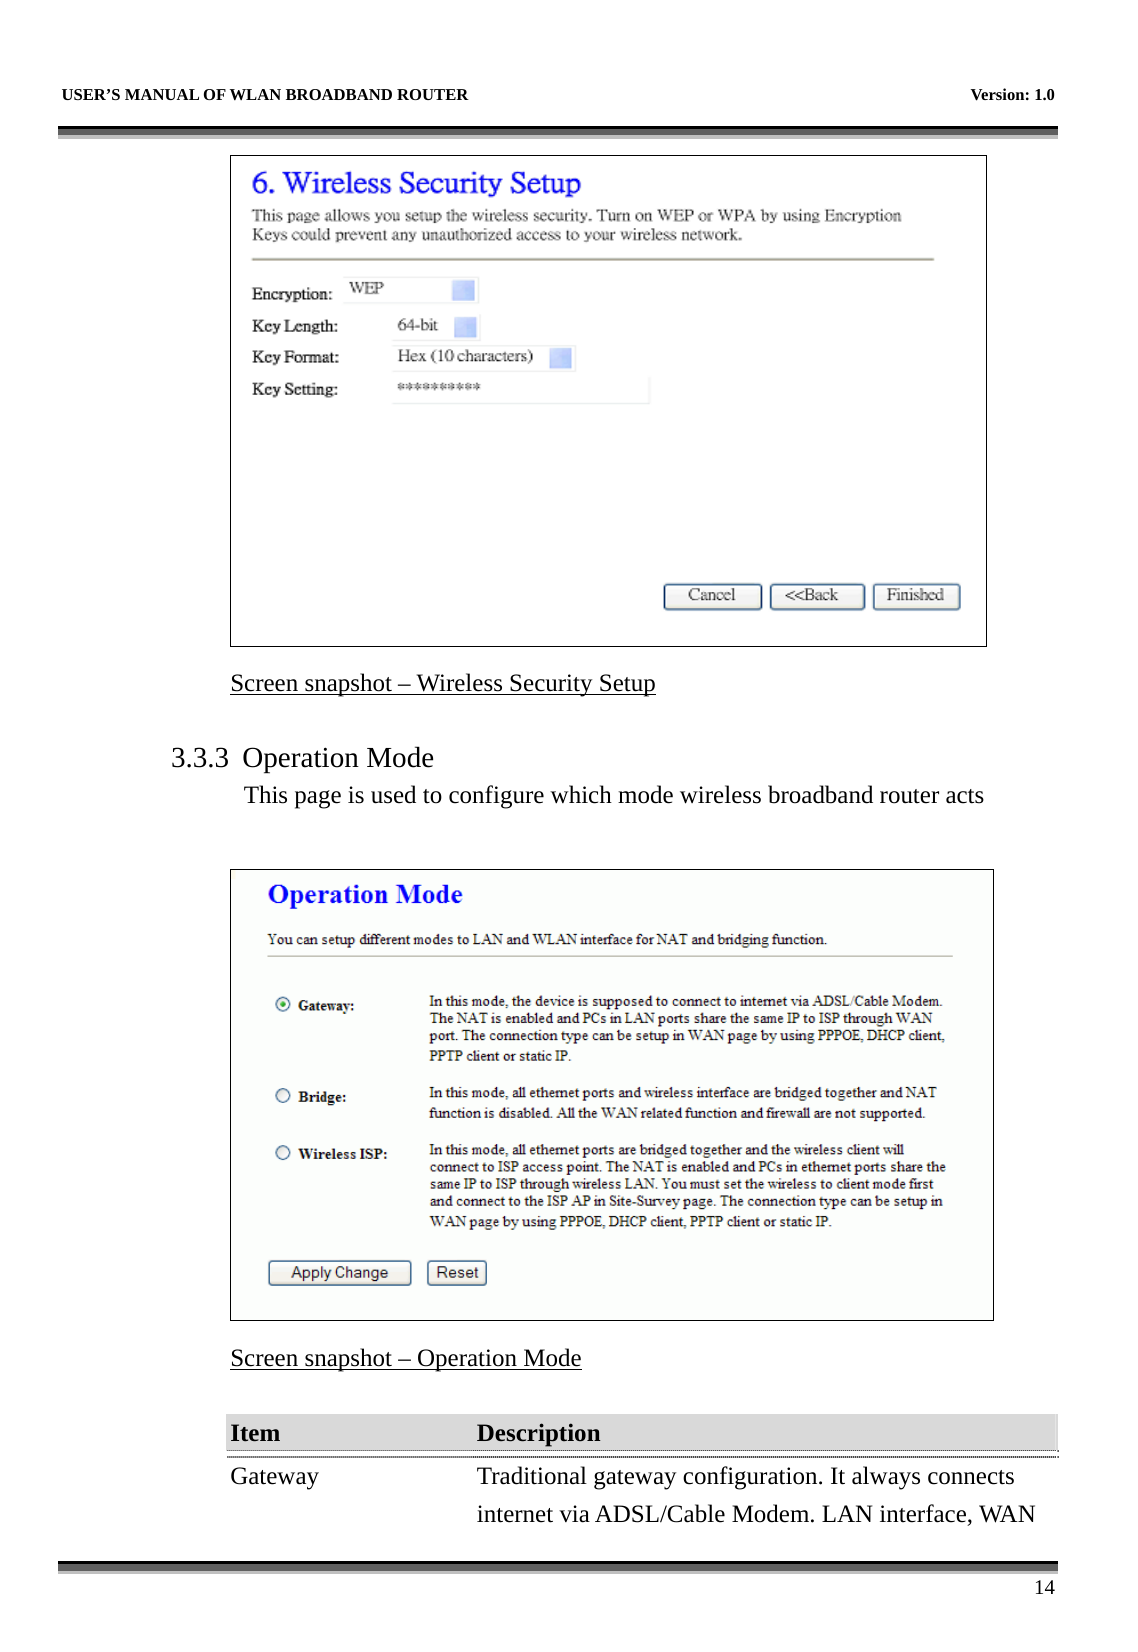   USER’S MANUAL OF WLAN BROADBAND ROUTER    Version: 1.0      14  Screen snapshot – Wireless Security Setup  3.3.3 Operation Mode This page is used to configure which mode wireless broadband router acts   Screen snapshot – Operation Mode  Item  Description   Gateway Traditional gateway configuration. It always connects internet via ADSL/Cable Modem. LAN interface, WAN 